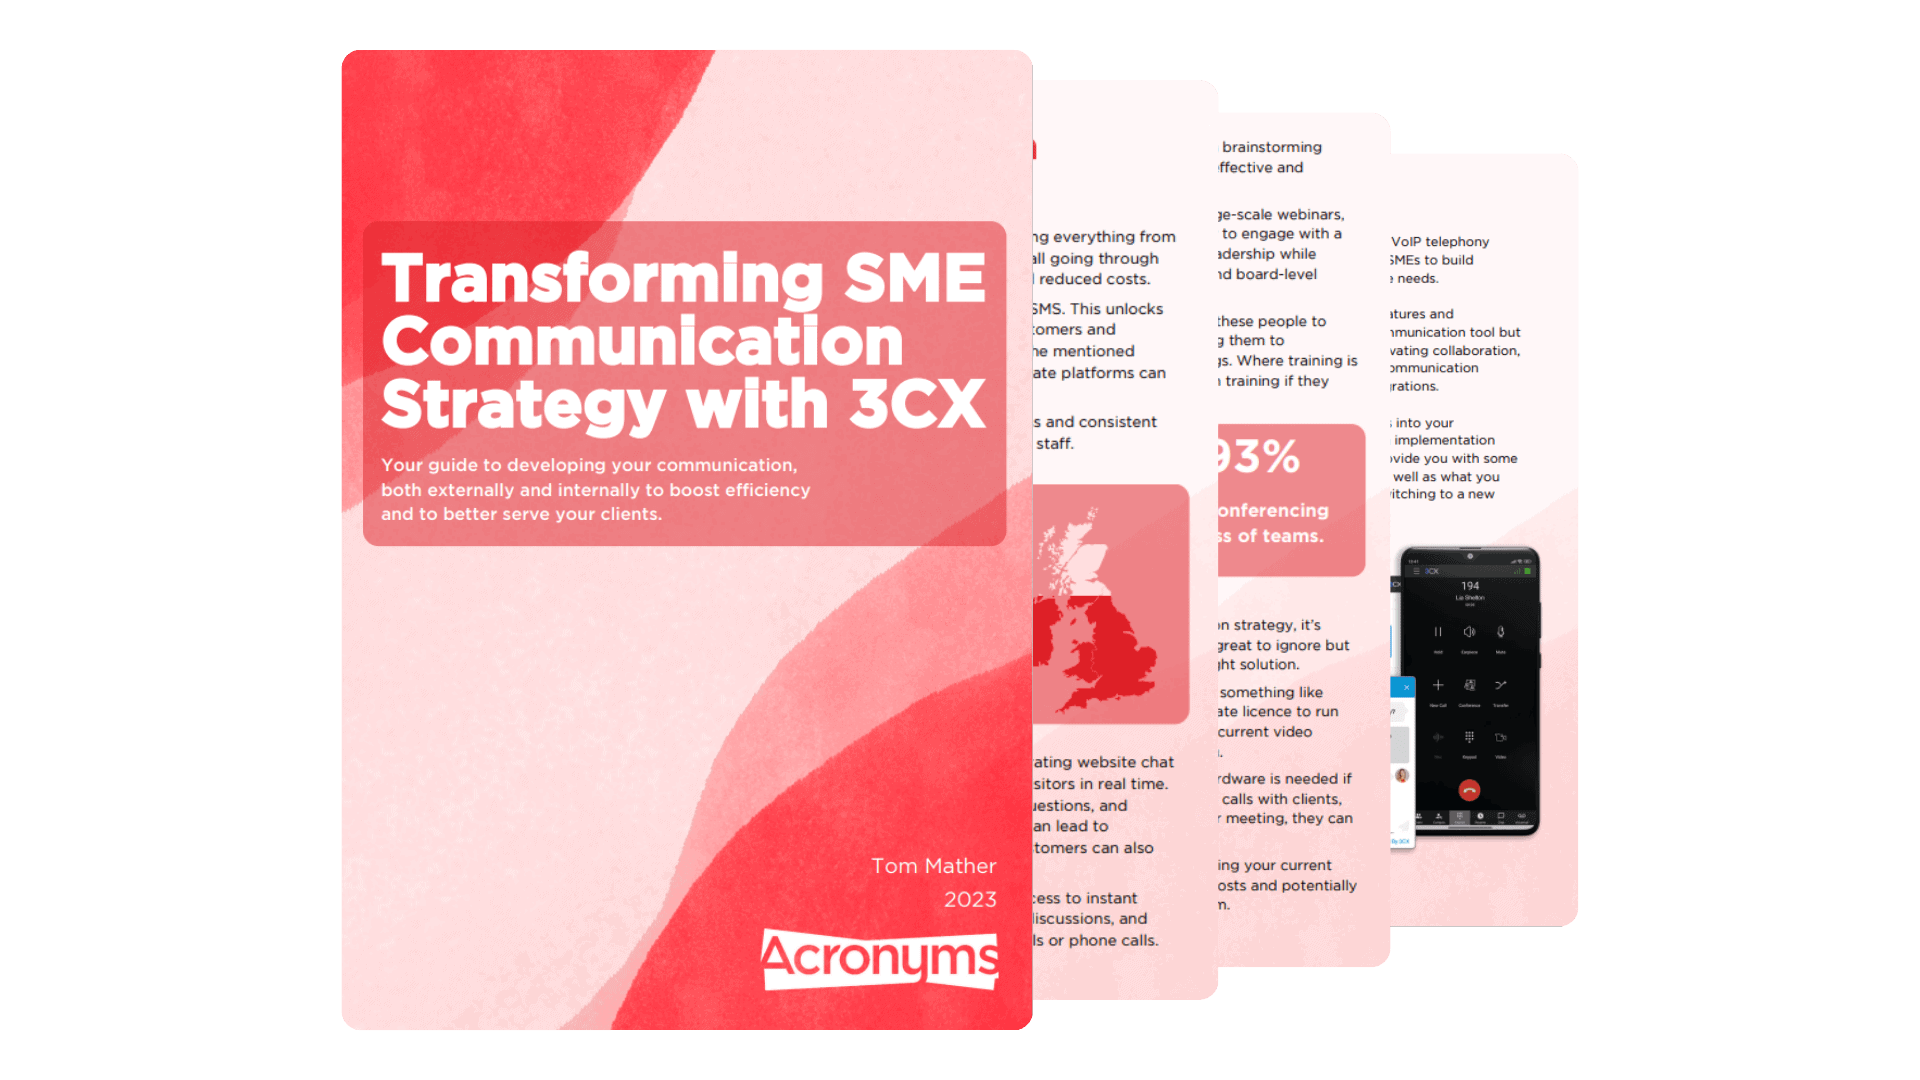 3CX Whitepaper: Transforming SME Communication Strategy with 3CX